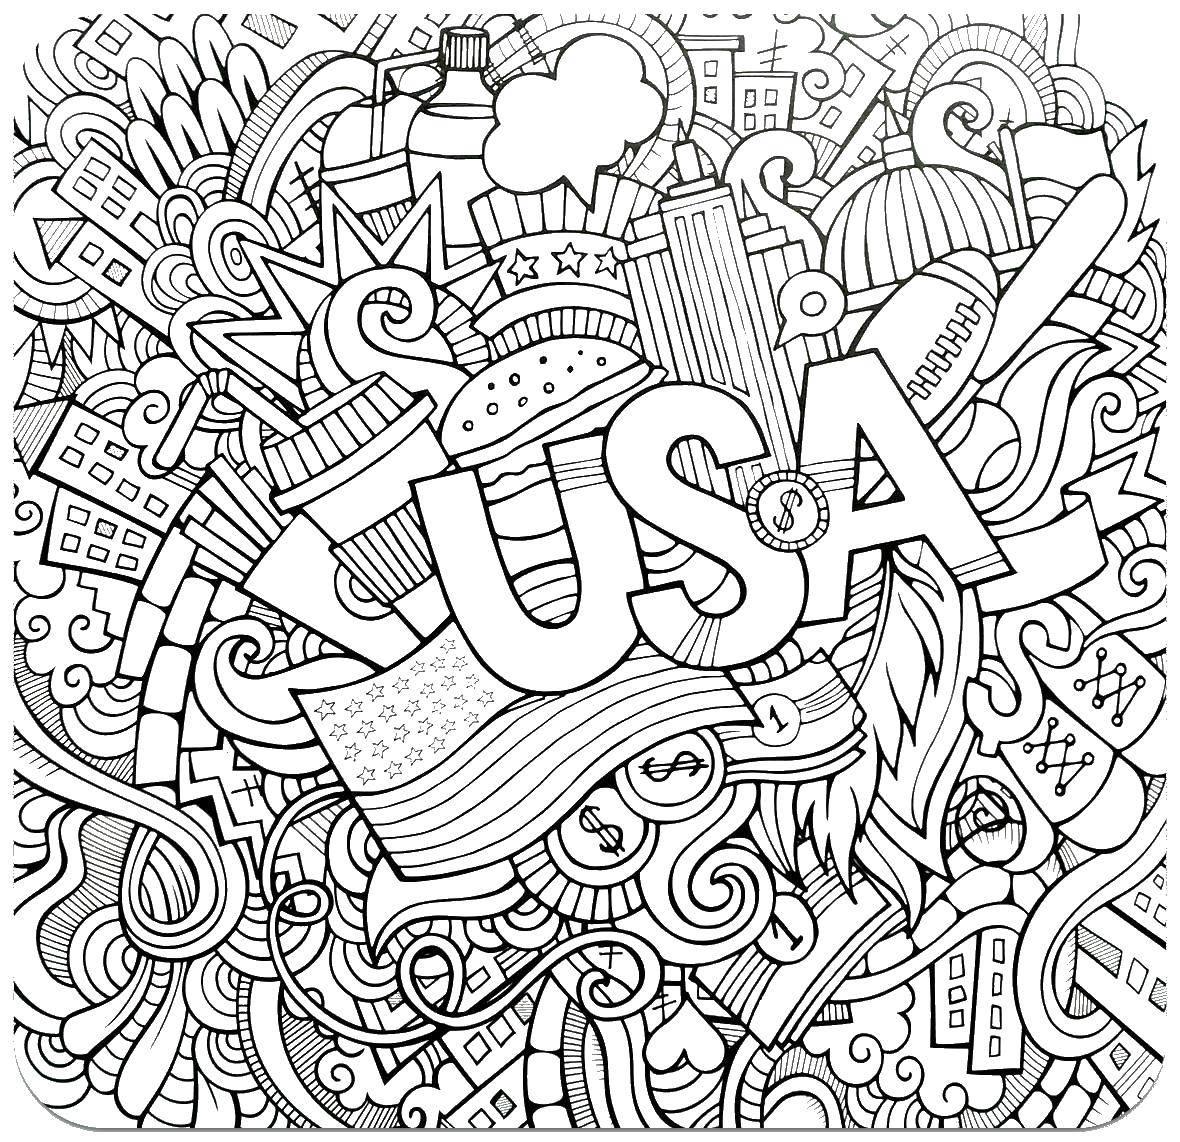 Coloring Amazing America. Category coloring antistress. Tags:  America, anti-stress, dolar.